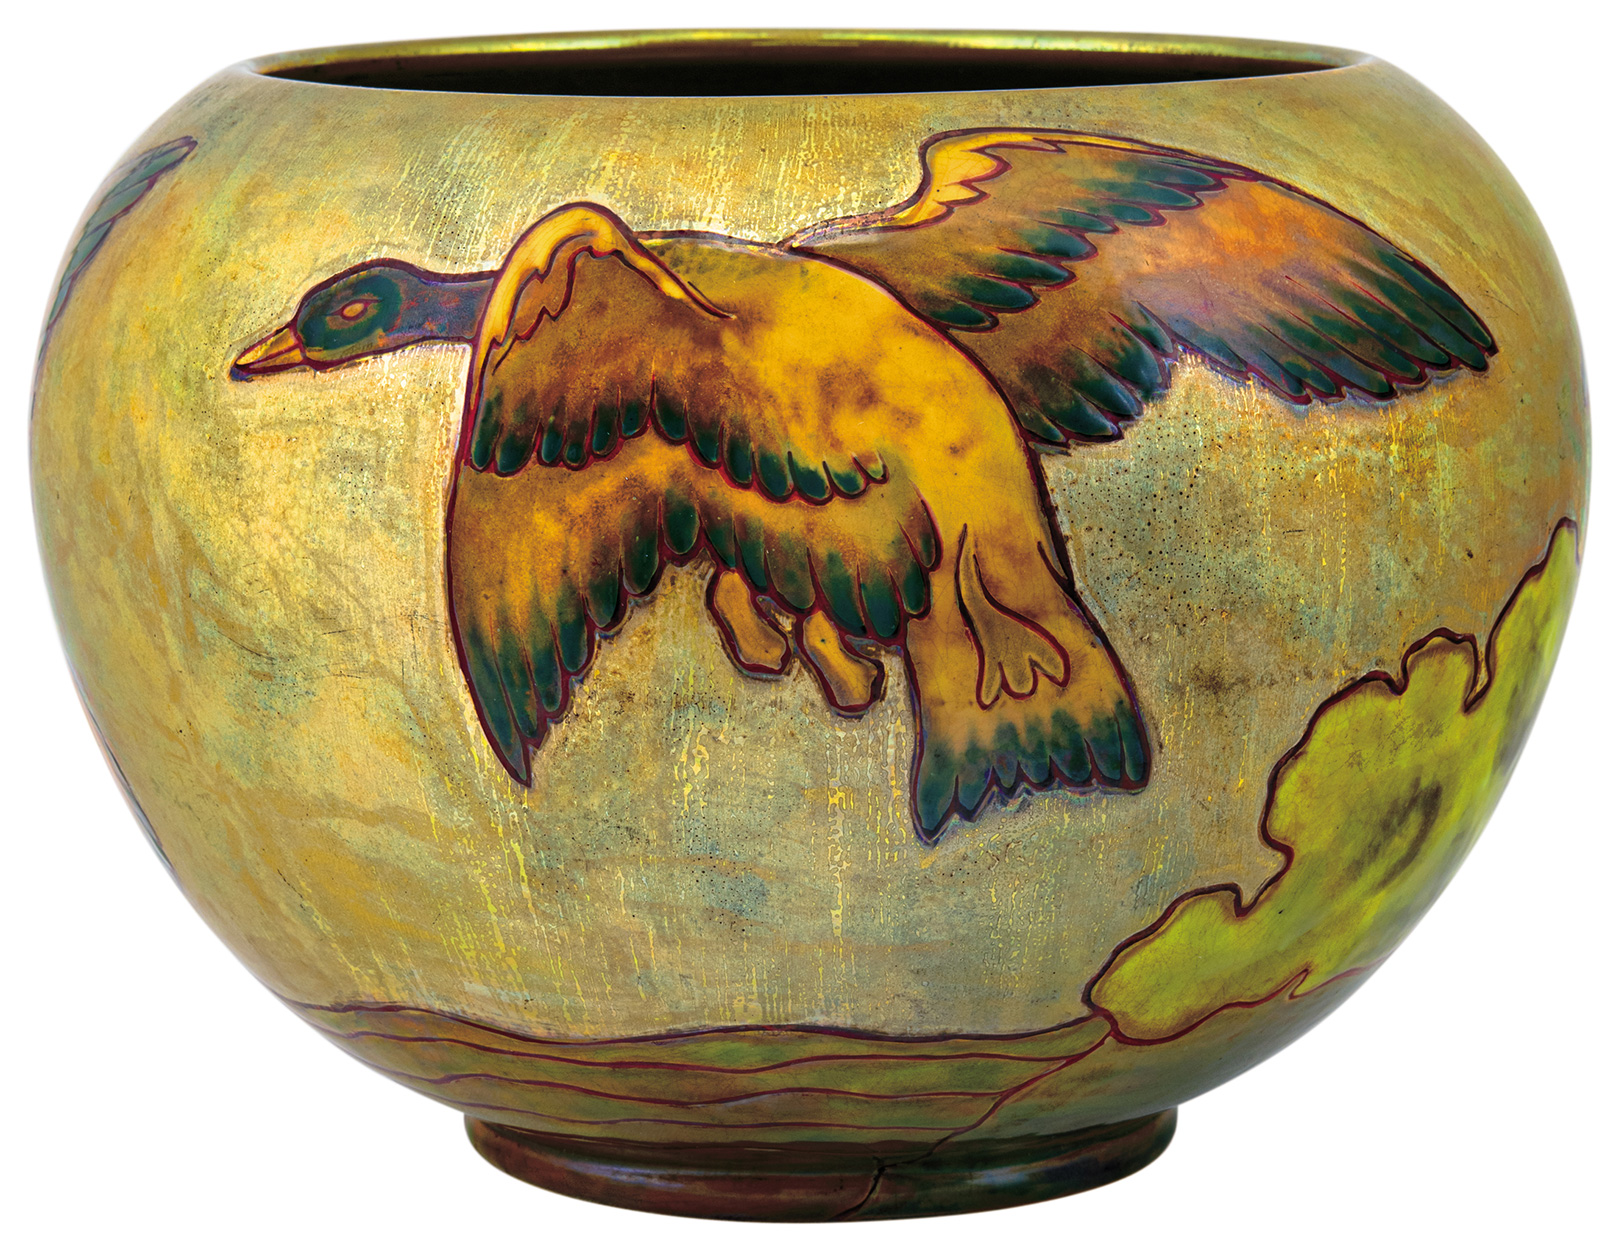 Zsolnay Flowerpot with Wild Geese, From the Venetian Series, Zsolnay, 1902